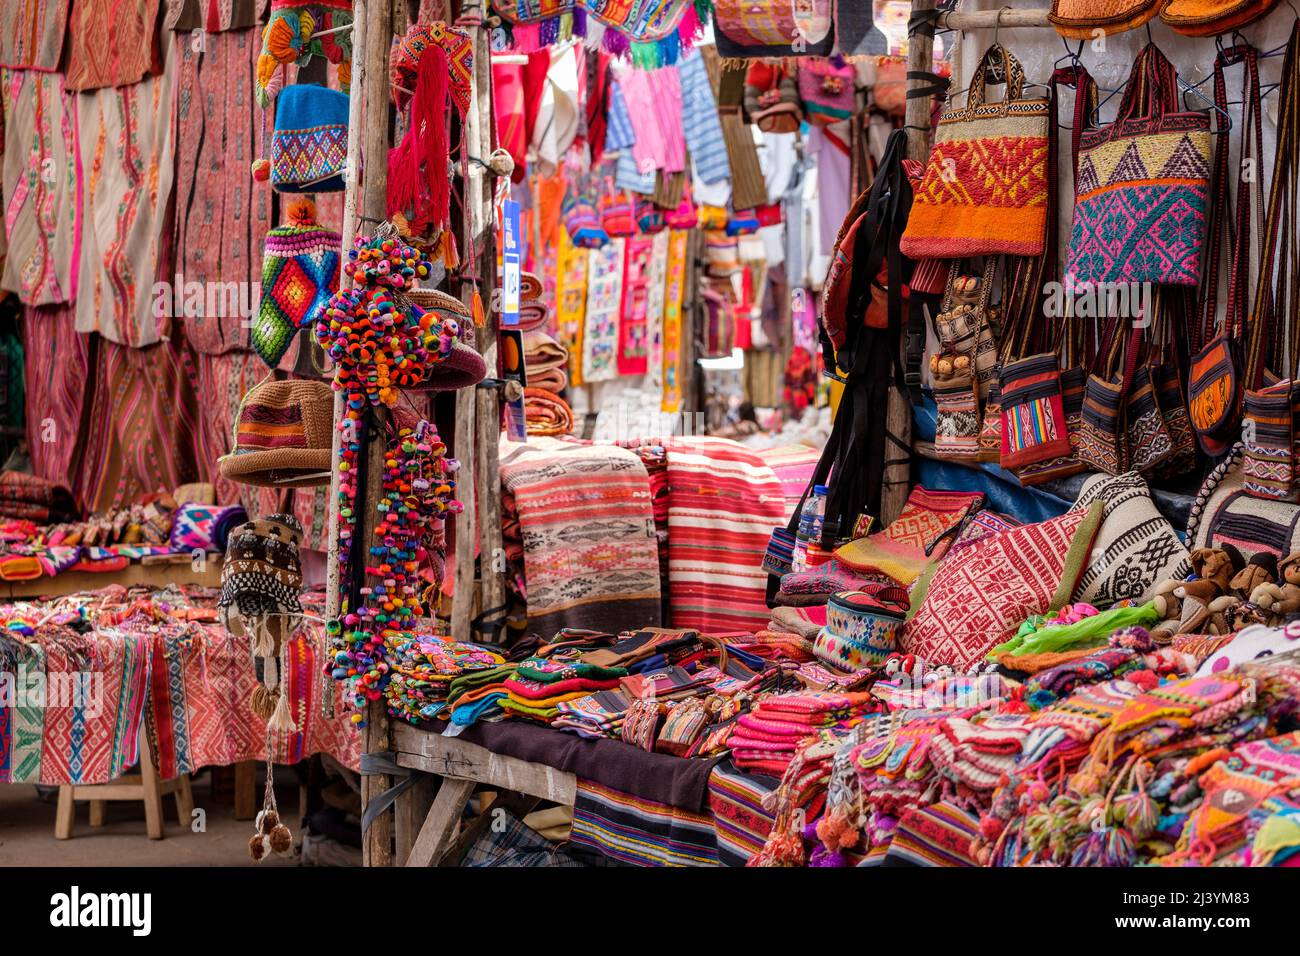 Andean textiles, traditional colourful Peruvian blankets, hats and purses for sale at the Pisac public market, Peru Sacred Valley. Stock Photo